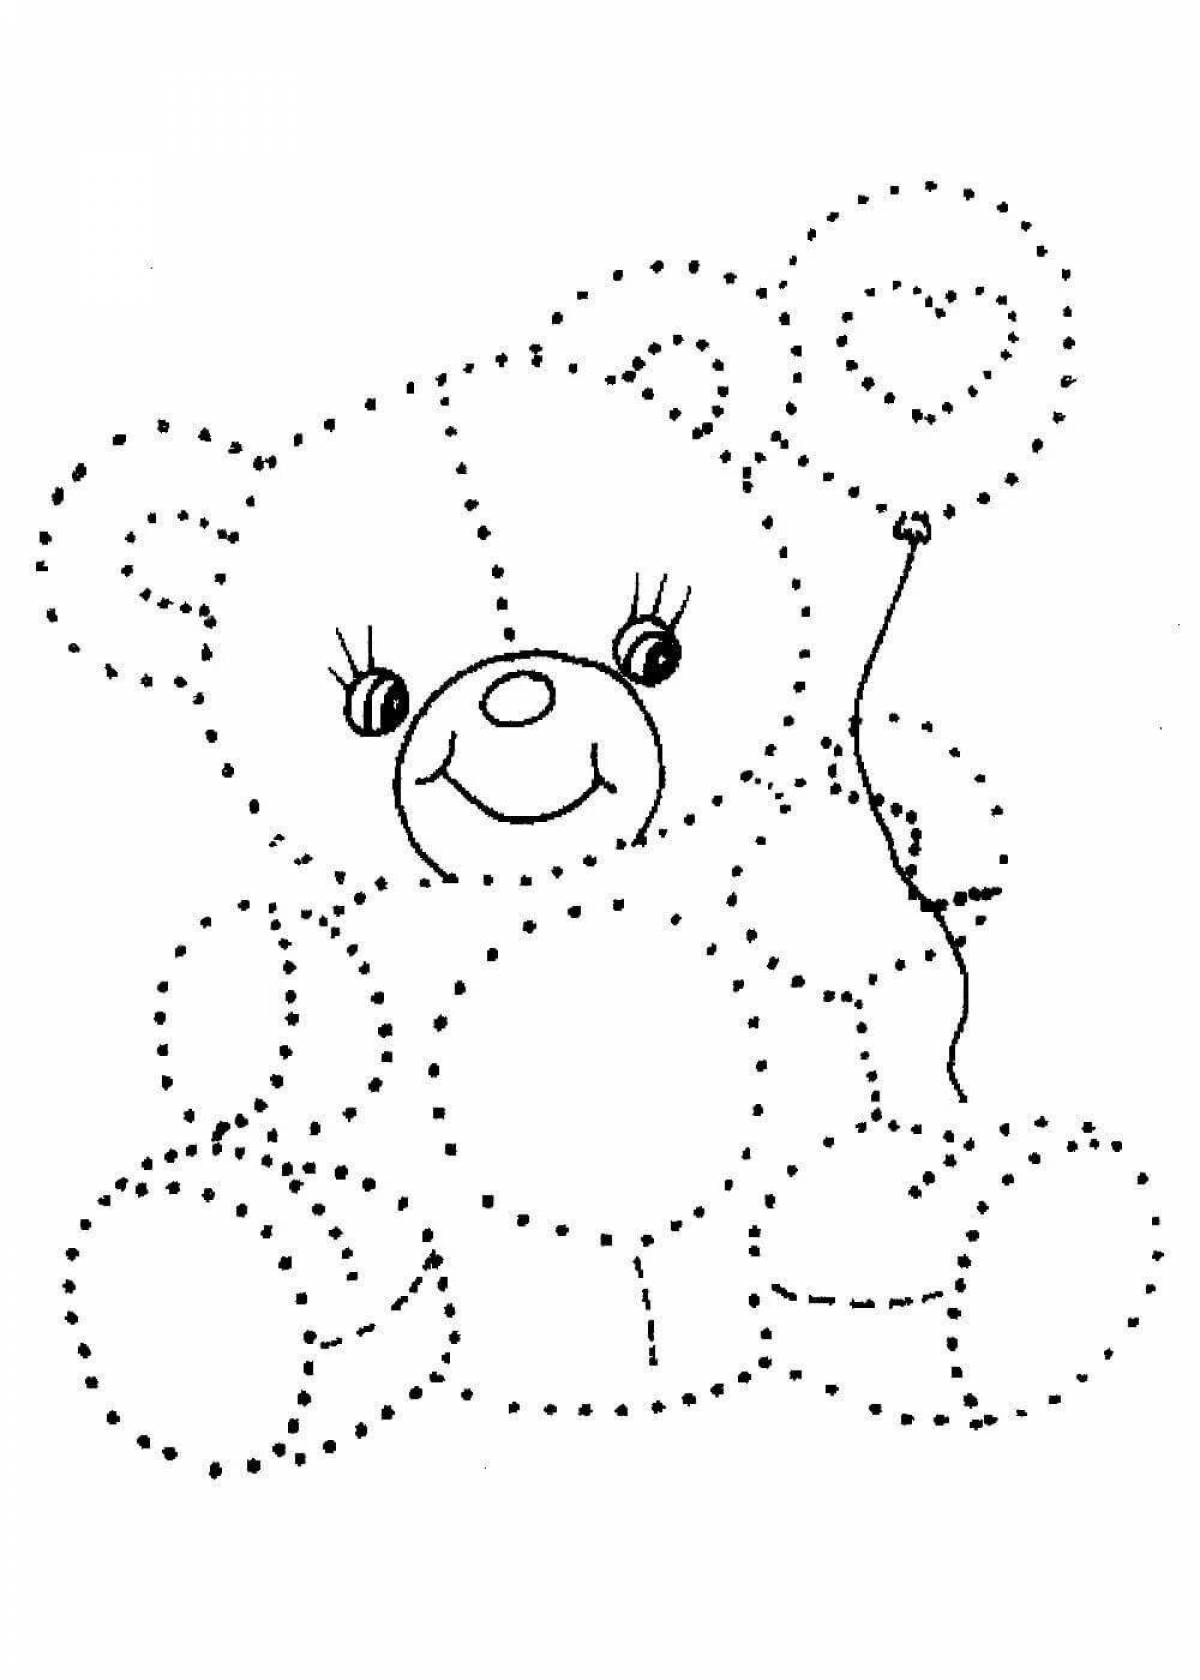 Dot-to-Dot for 5 year olds #19